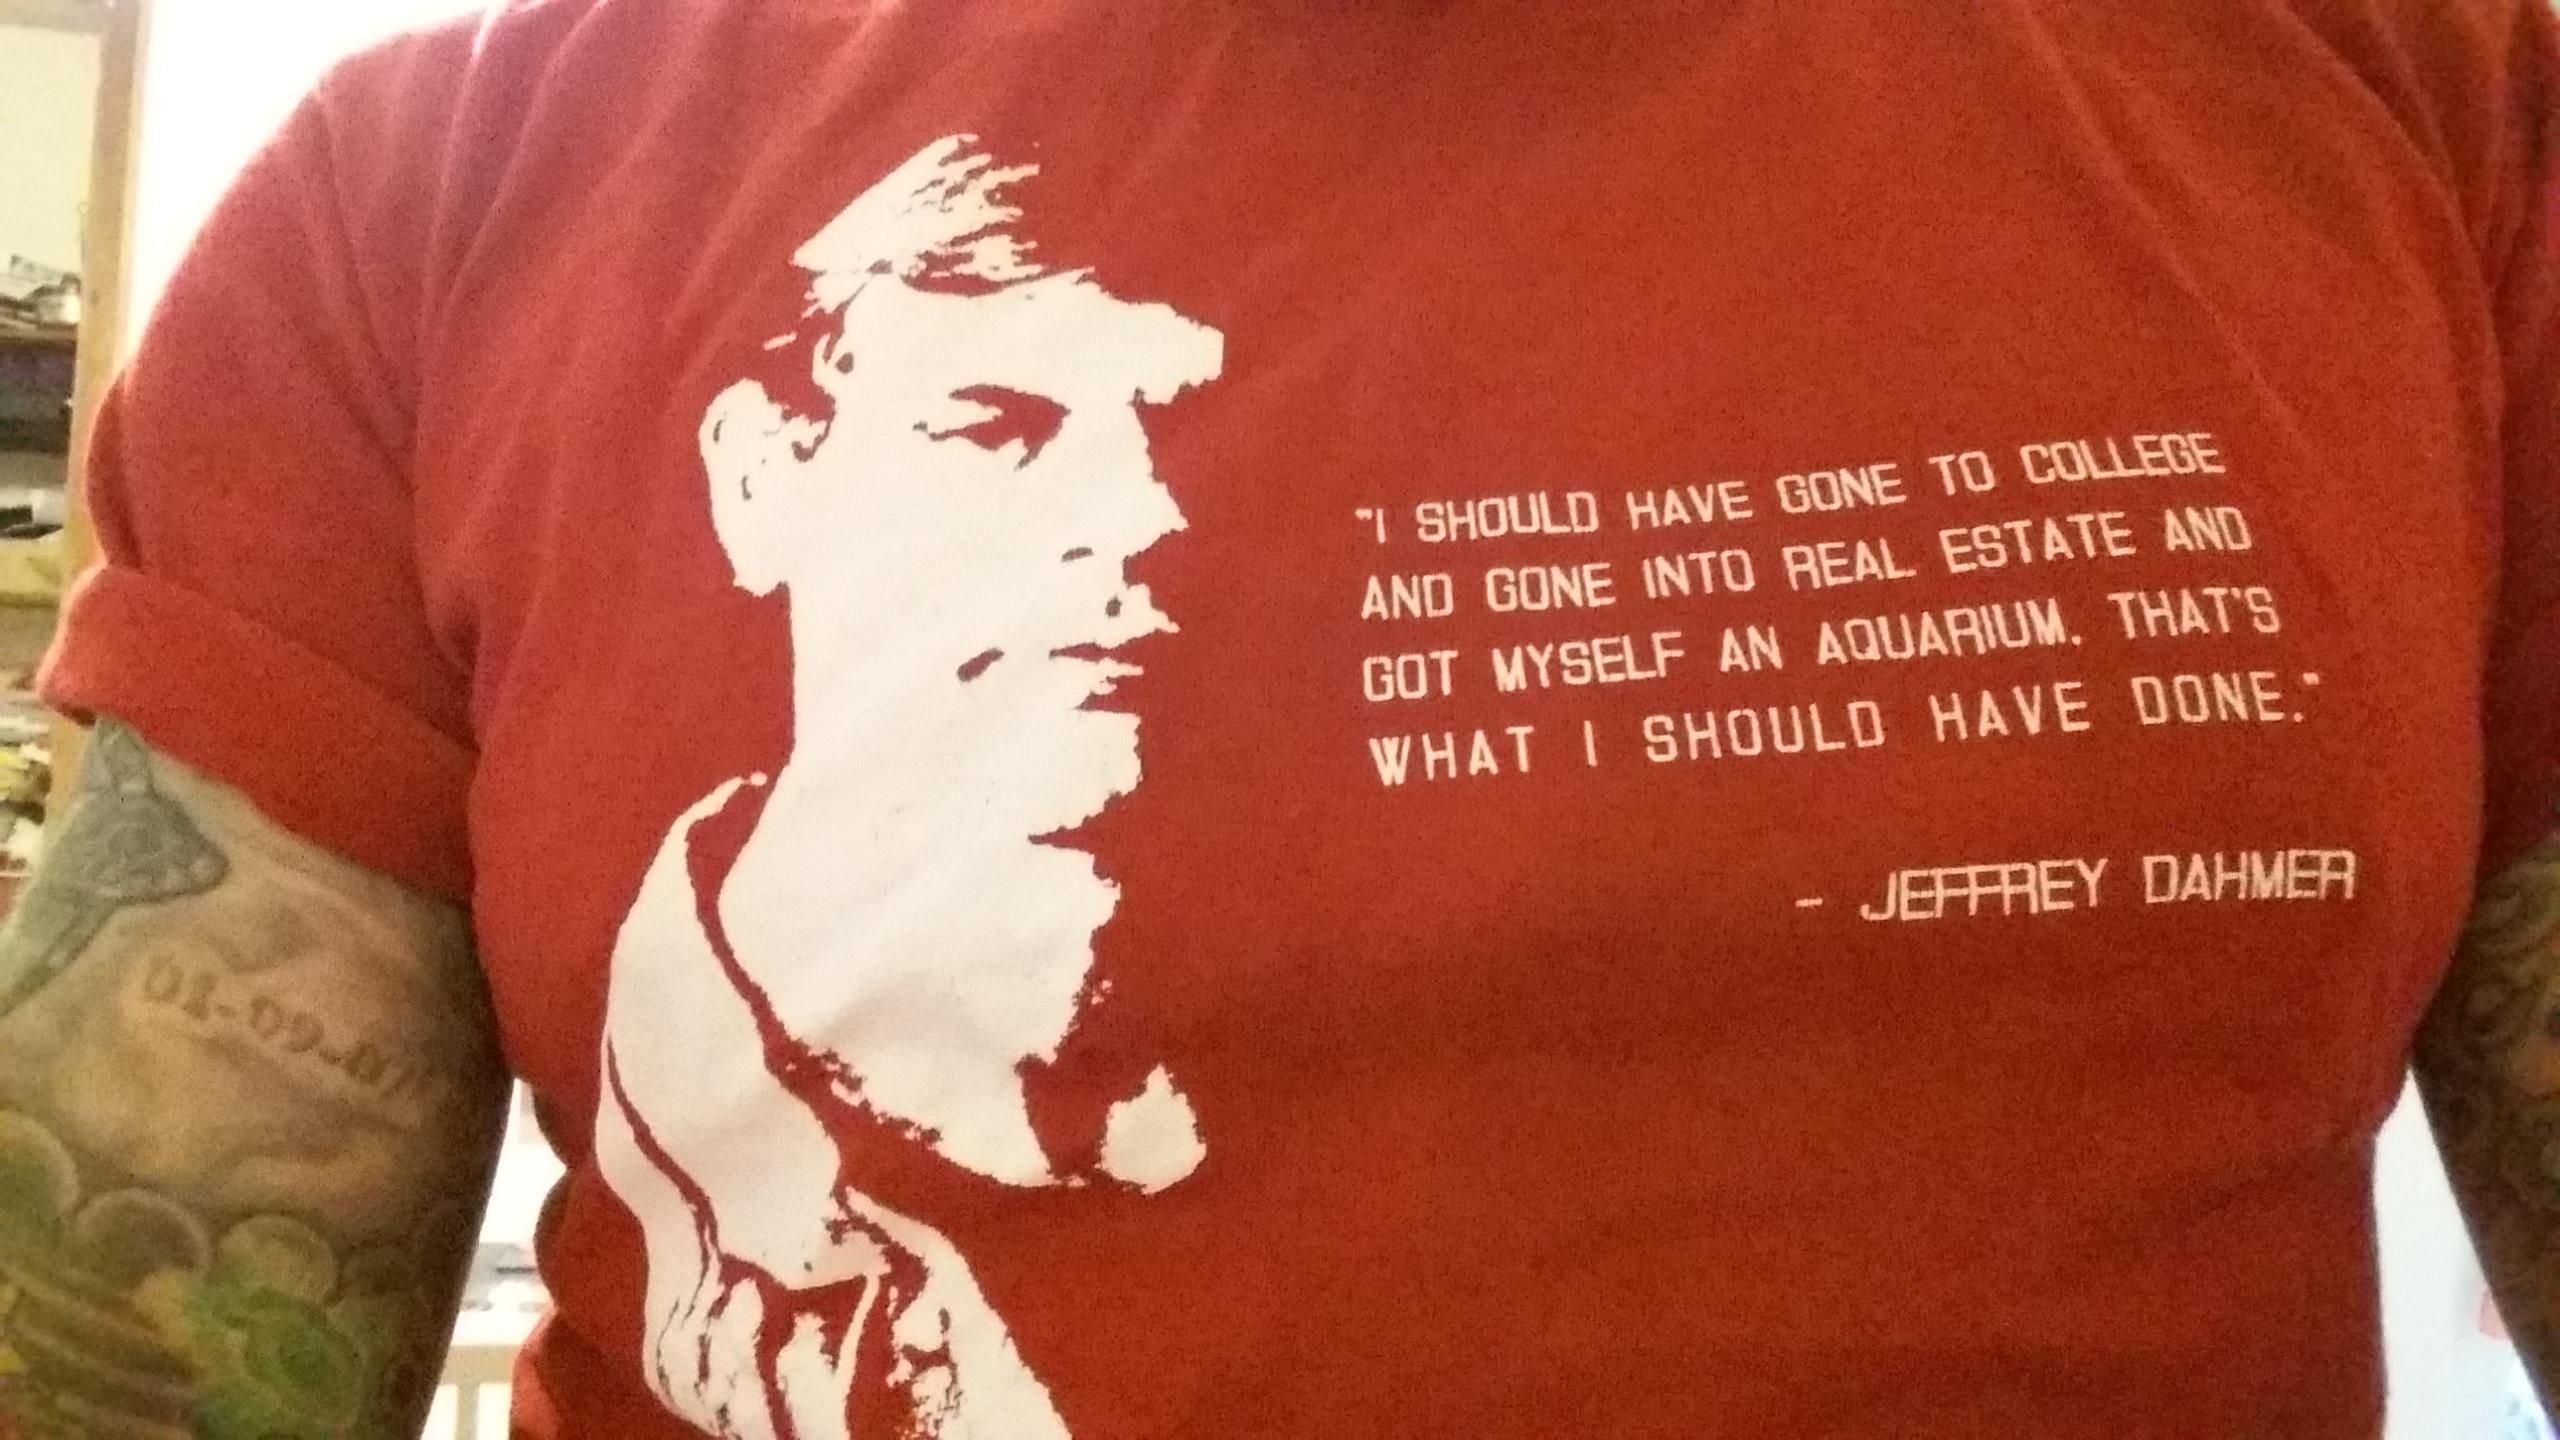 Just found my favourite old t-shirt with the most understated quote ever.